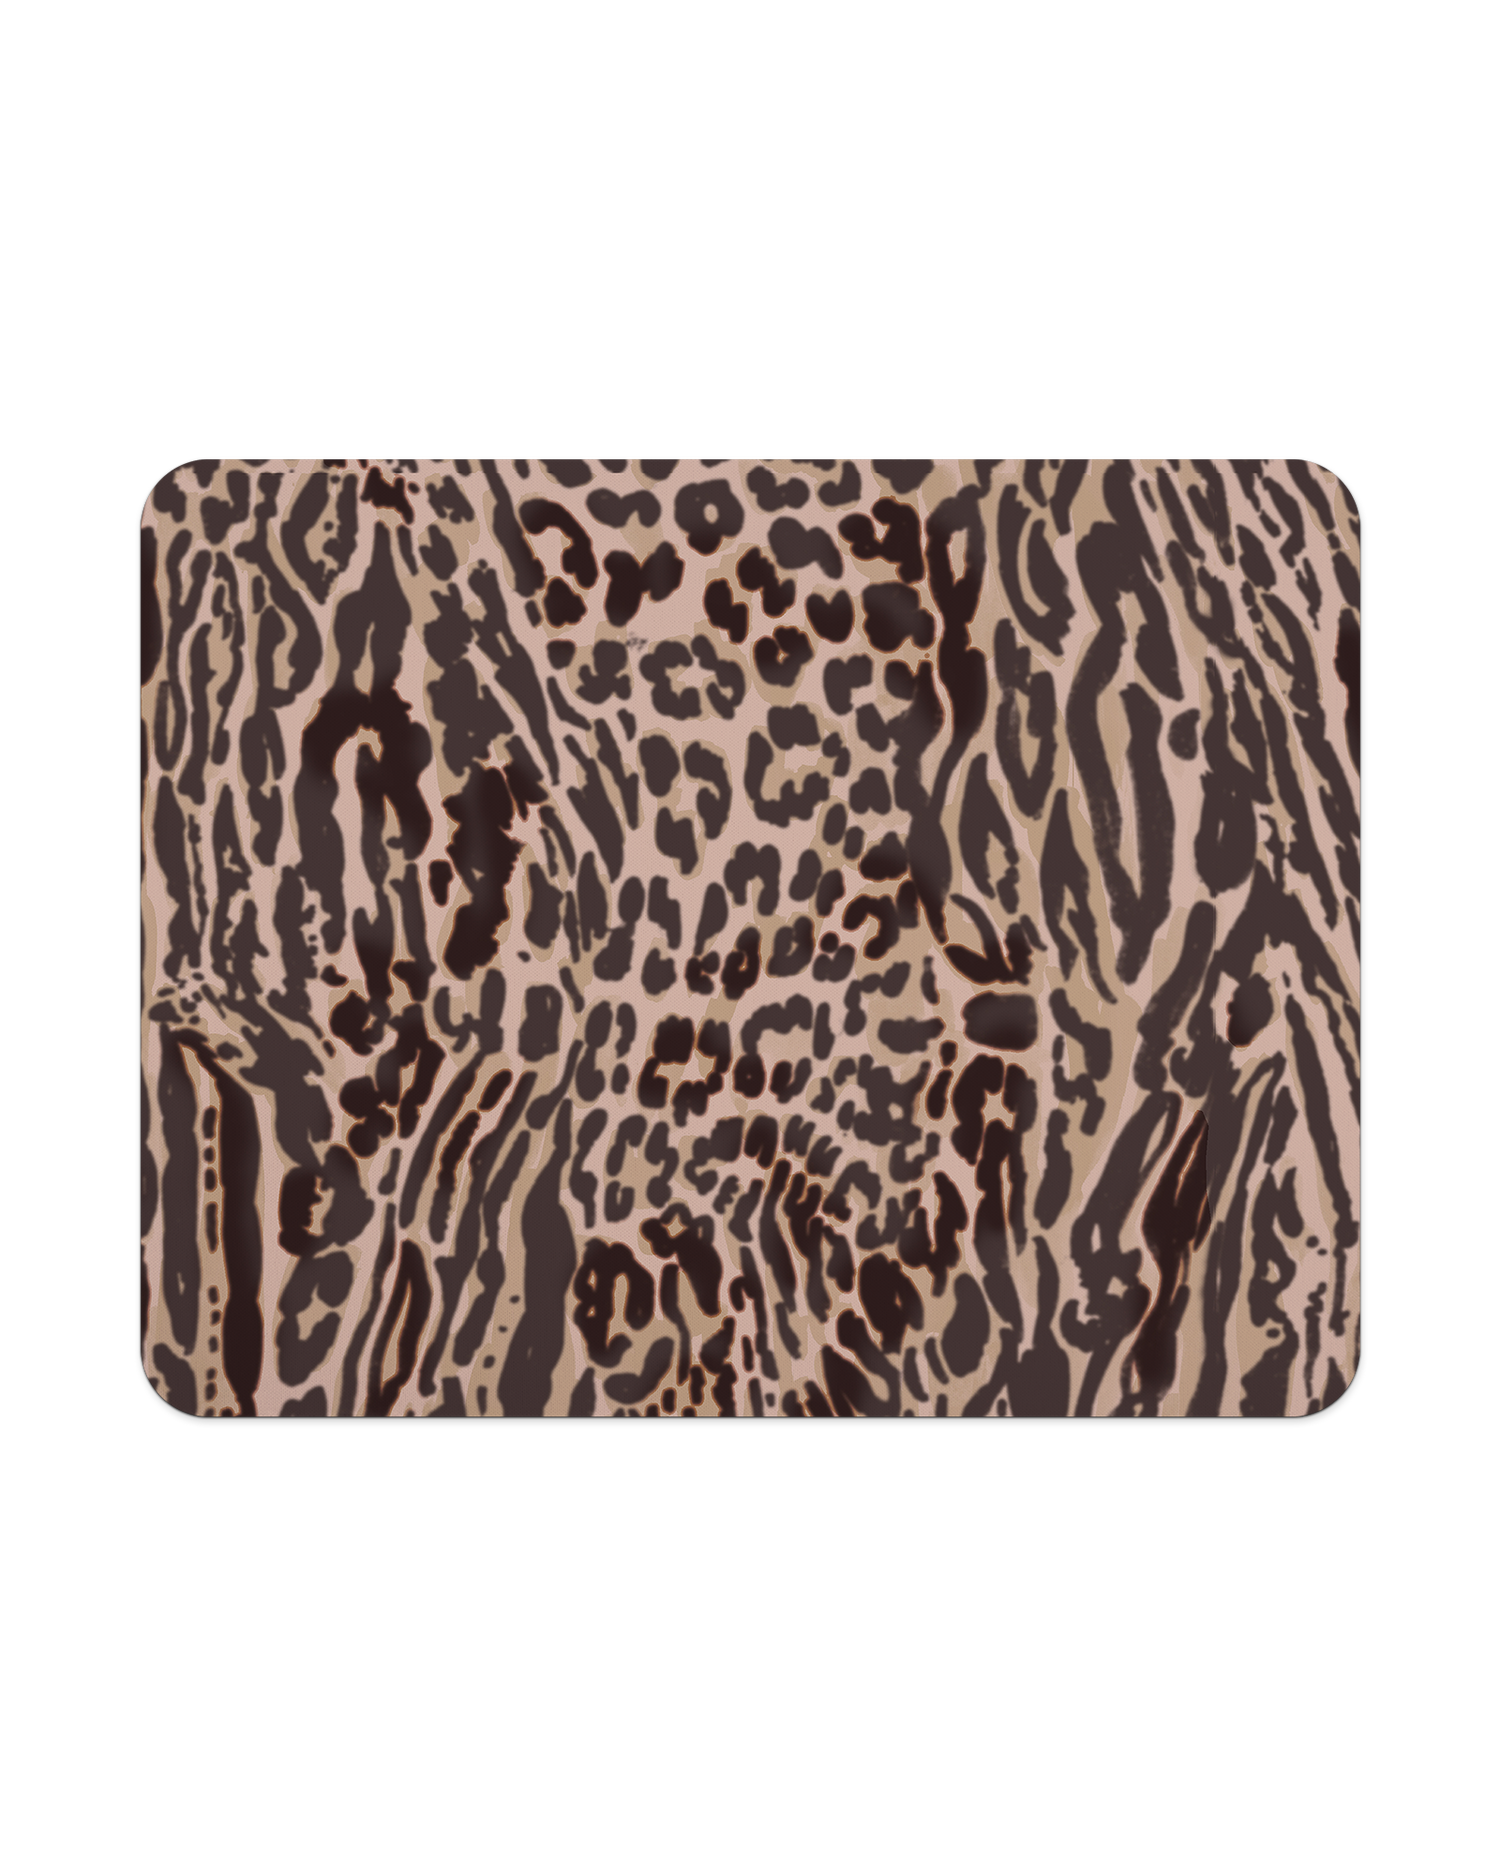 Animal Skin Tough Love Mouse Pad from Top